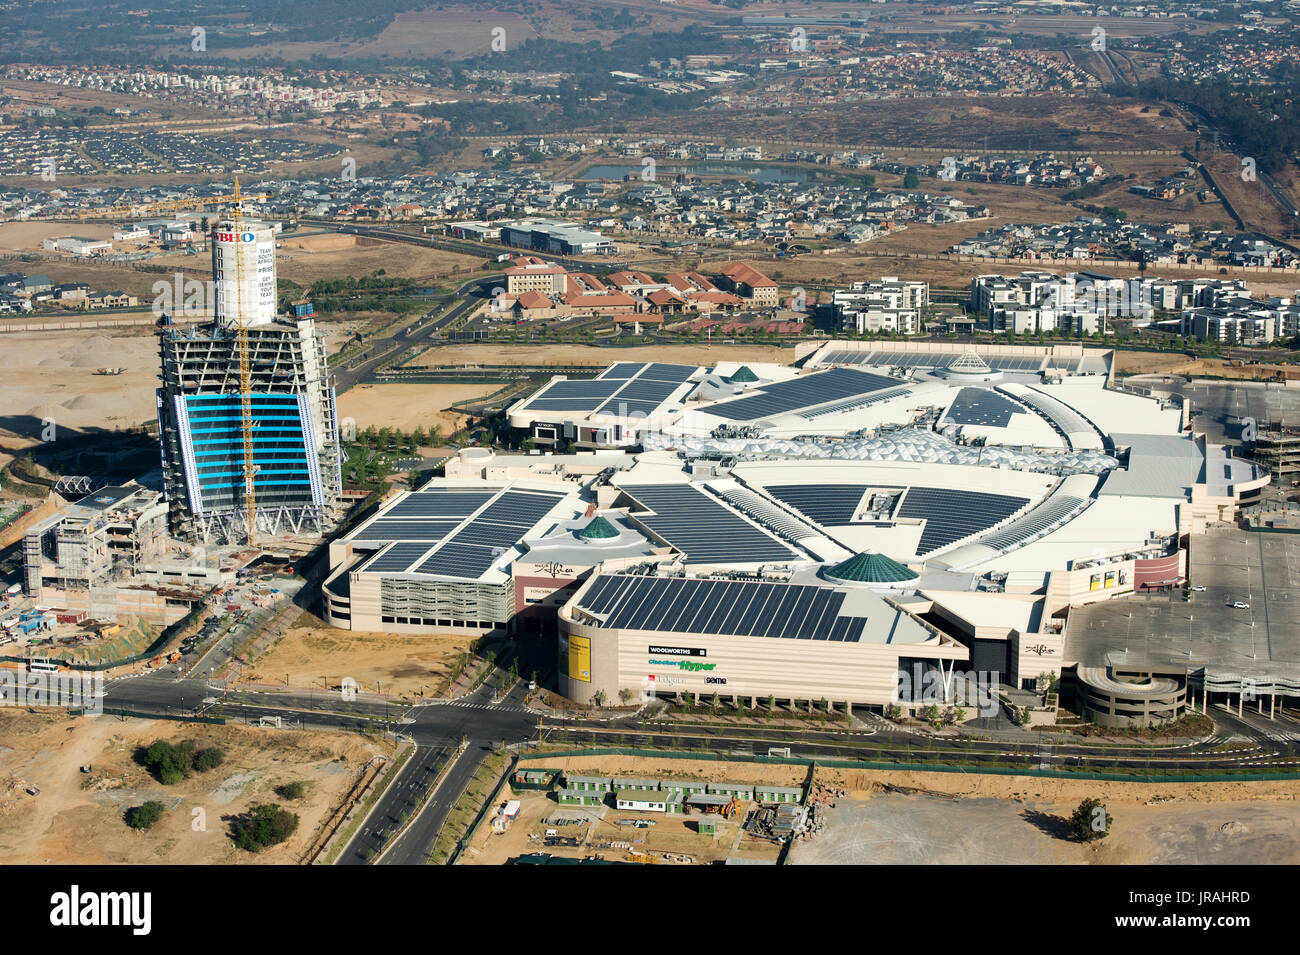 JOHANNESBURG, SOUTH AFRICA - September 24, 2016: Aerial view of the Mall of Africa under development Stock Photo